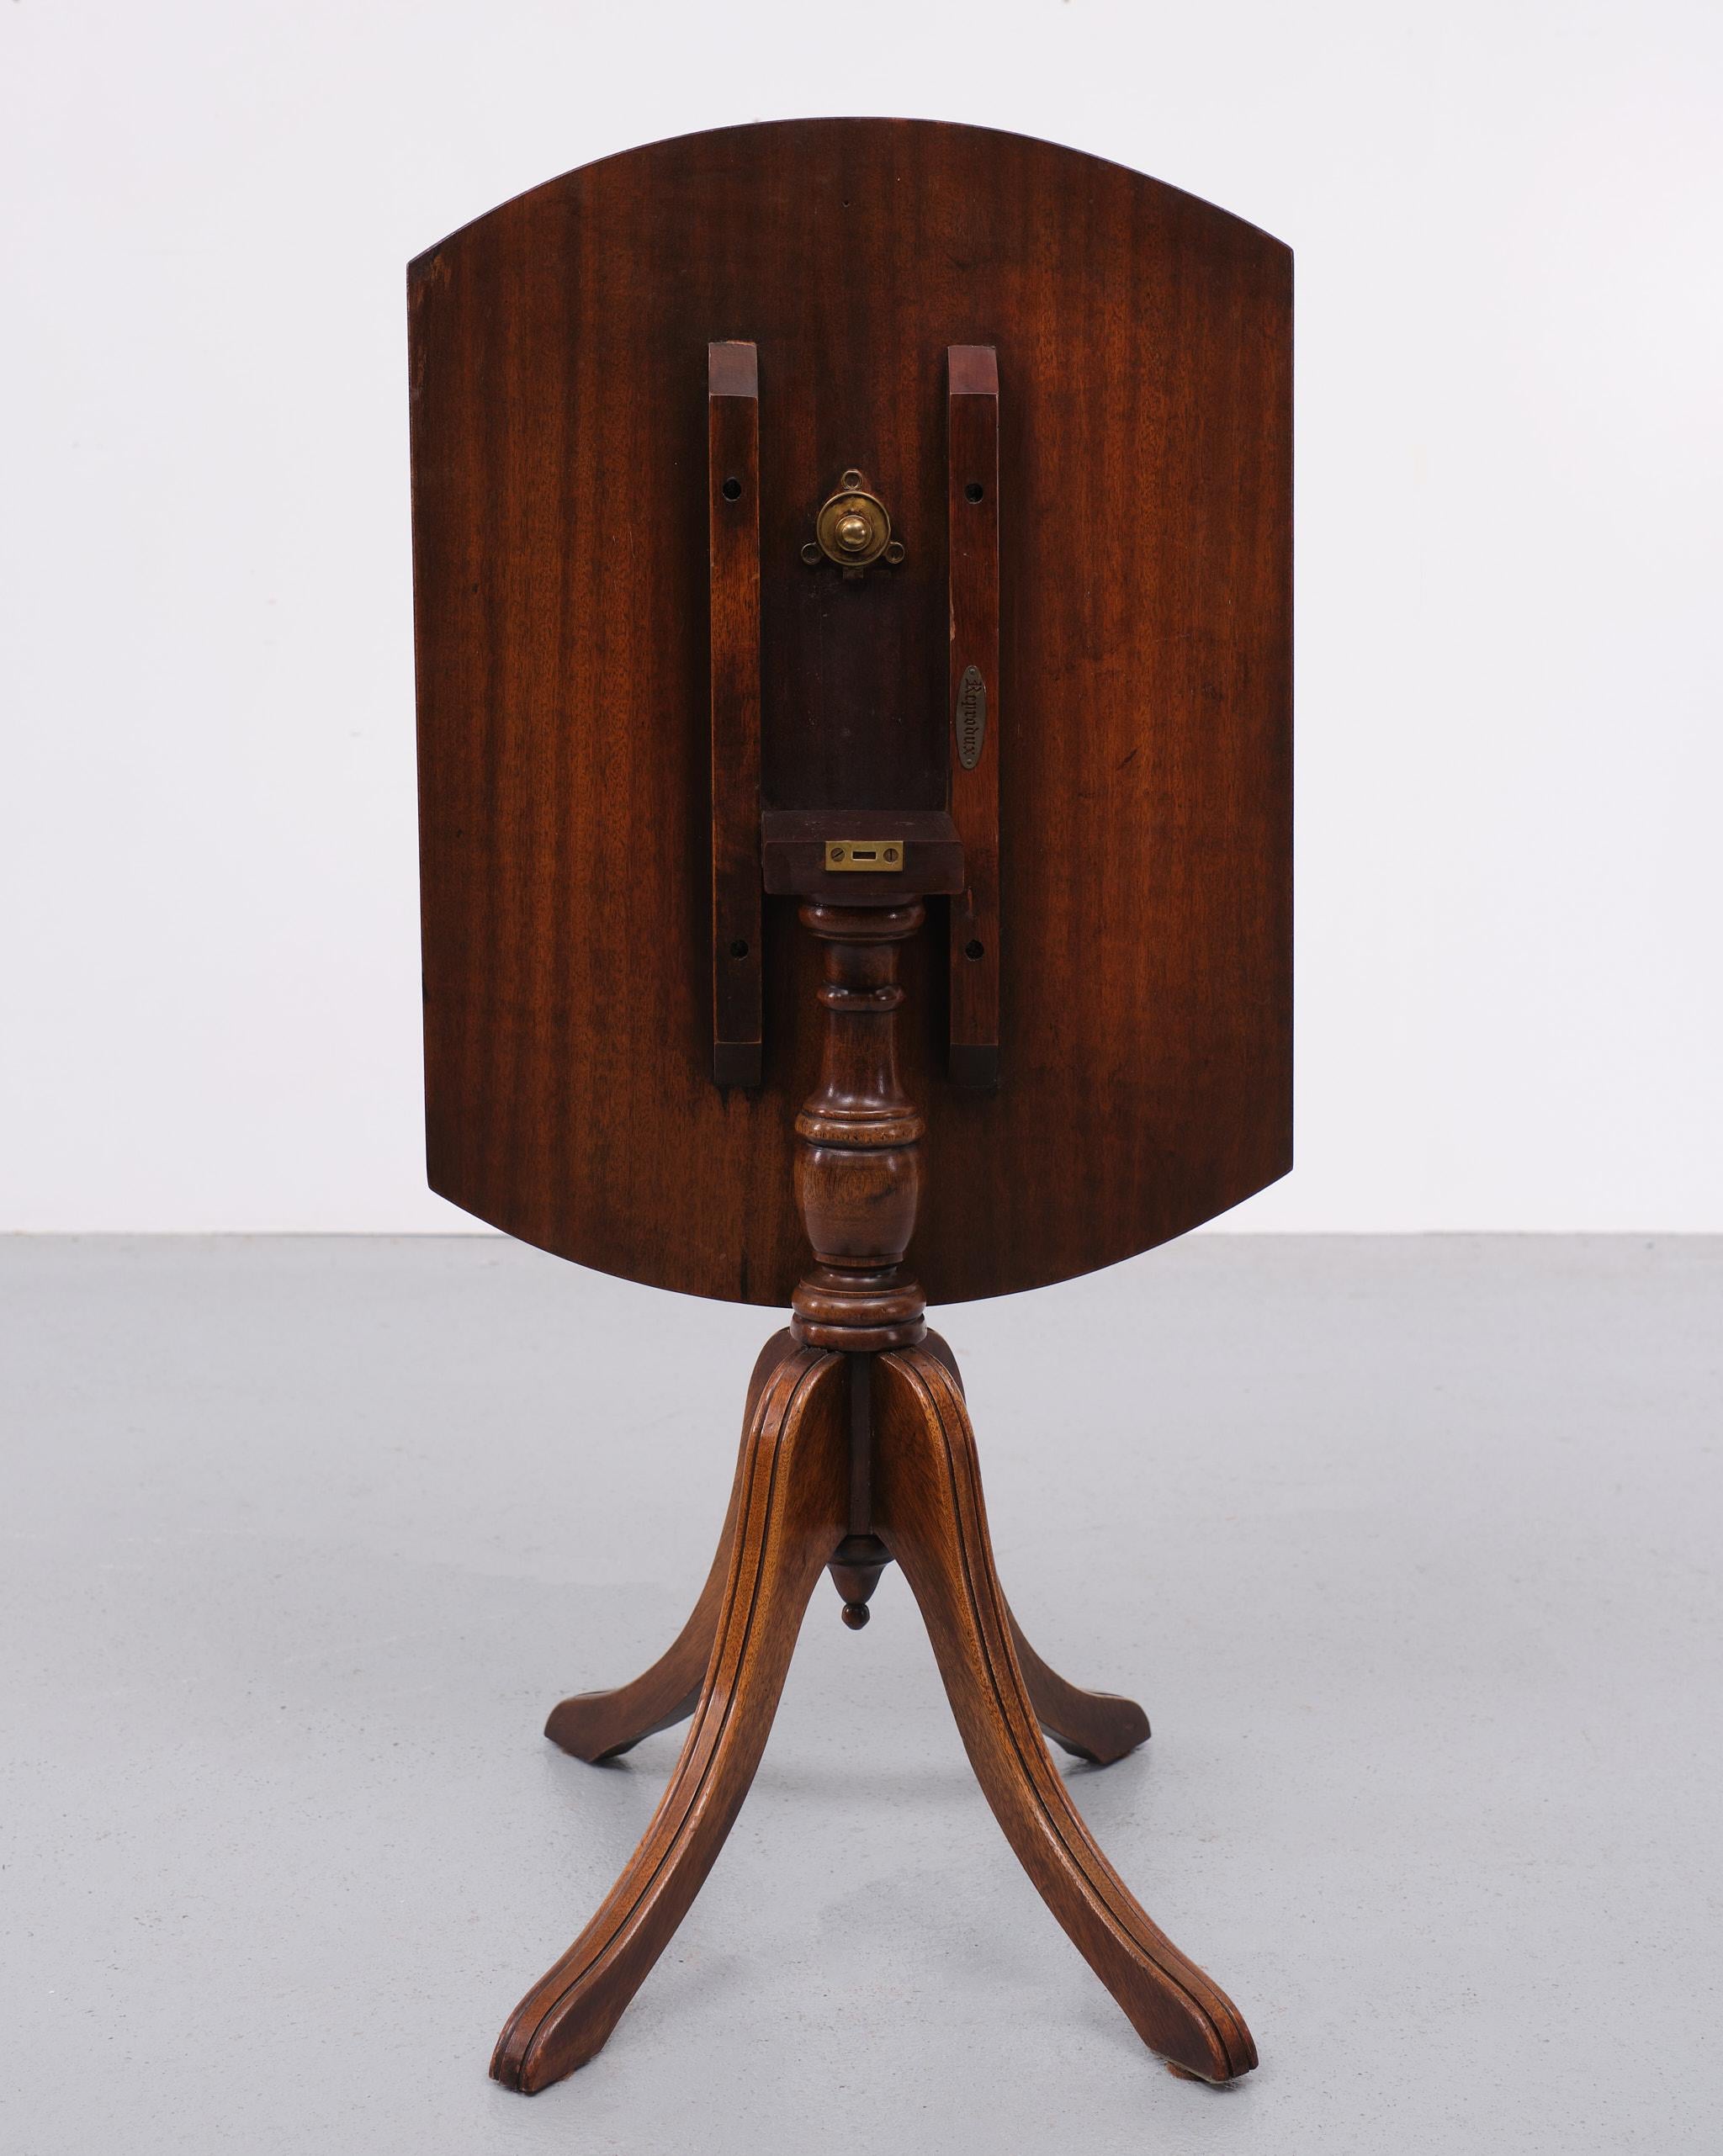 Mahogany Bevan Funell Reprodux Tilt Top Wine Table 1970s England For Sale